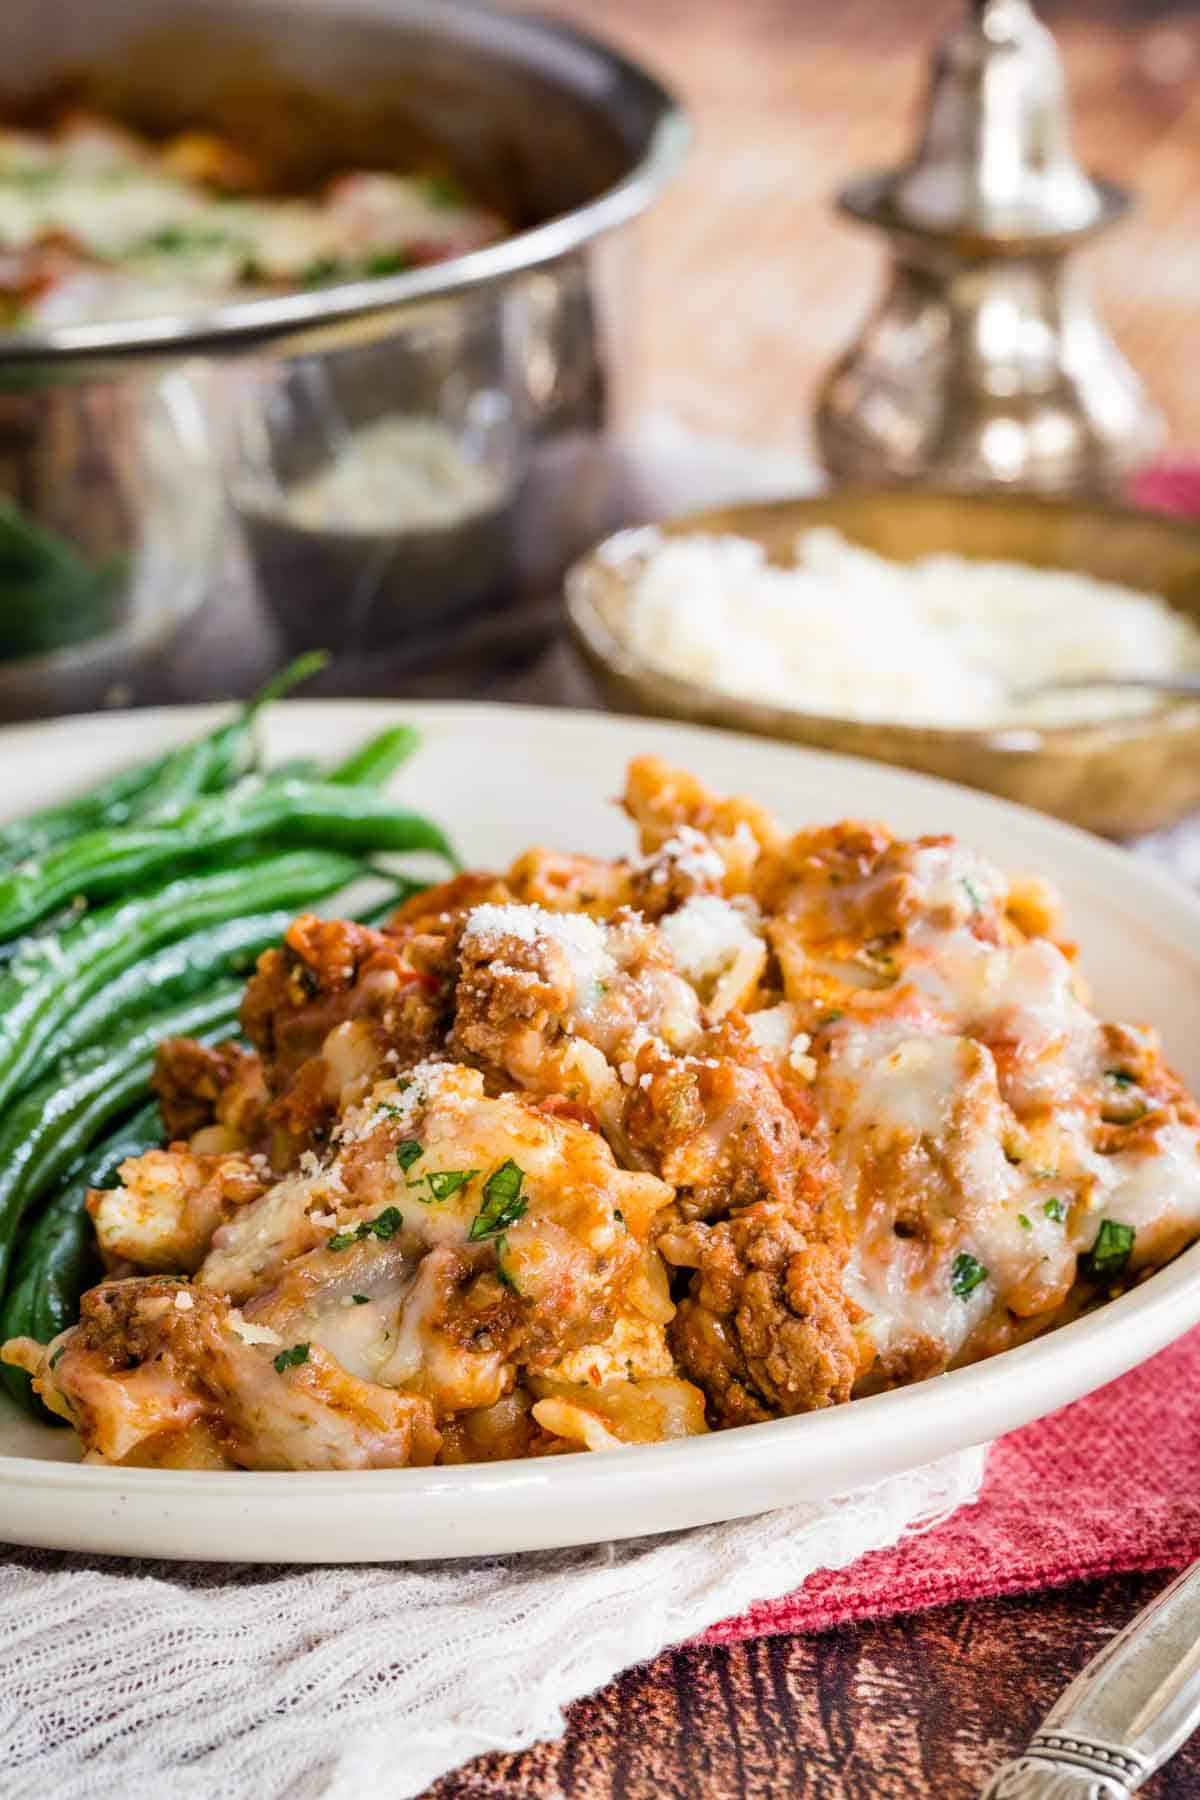 A serving of gluten-free skillet lasagna on a plate next to green beans, with a skillet in the background.